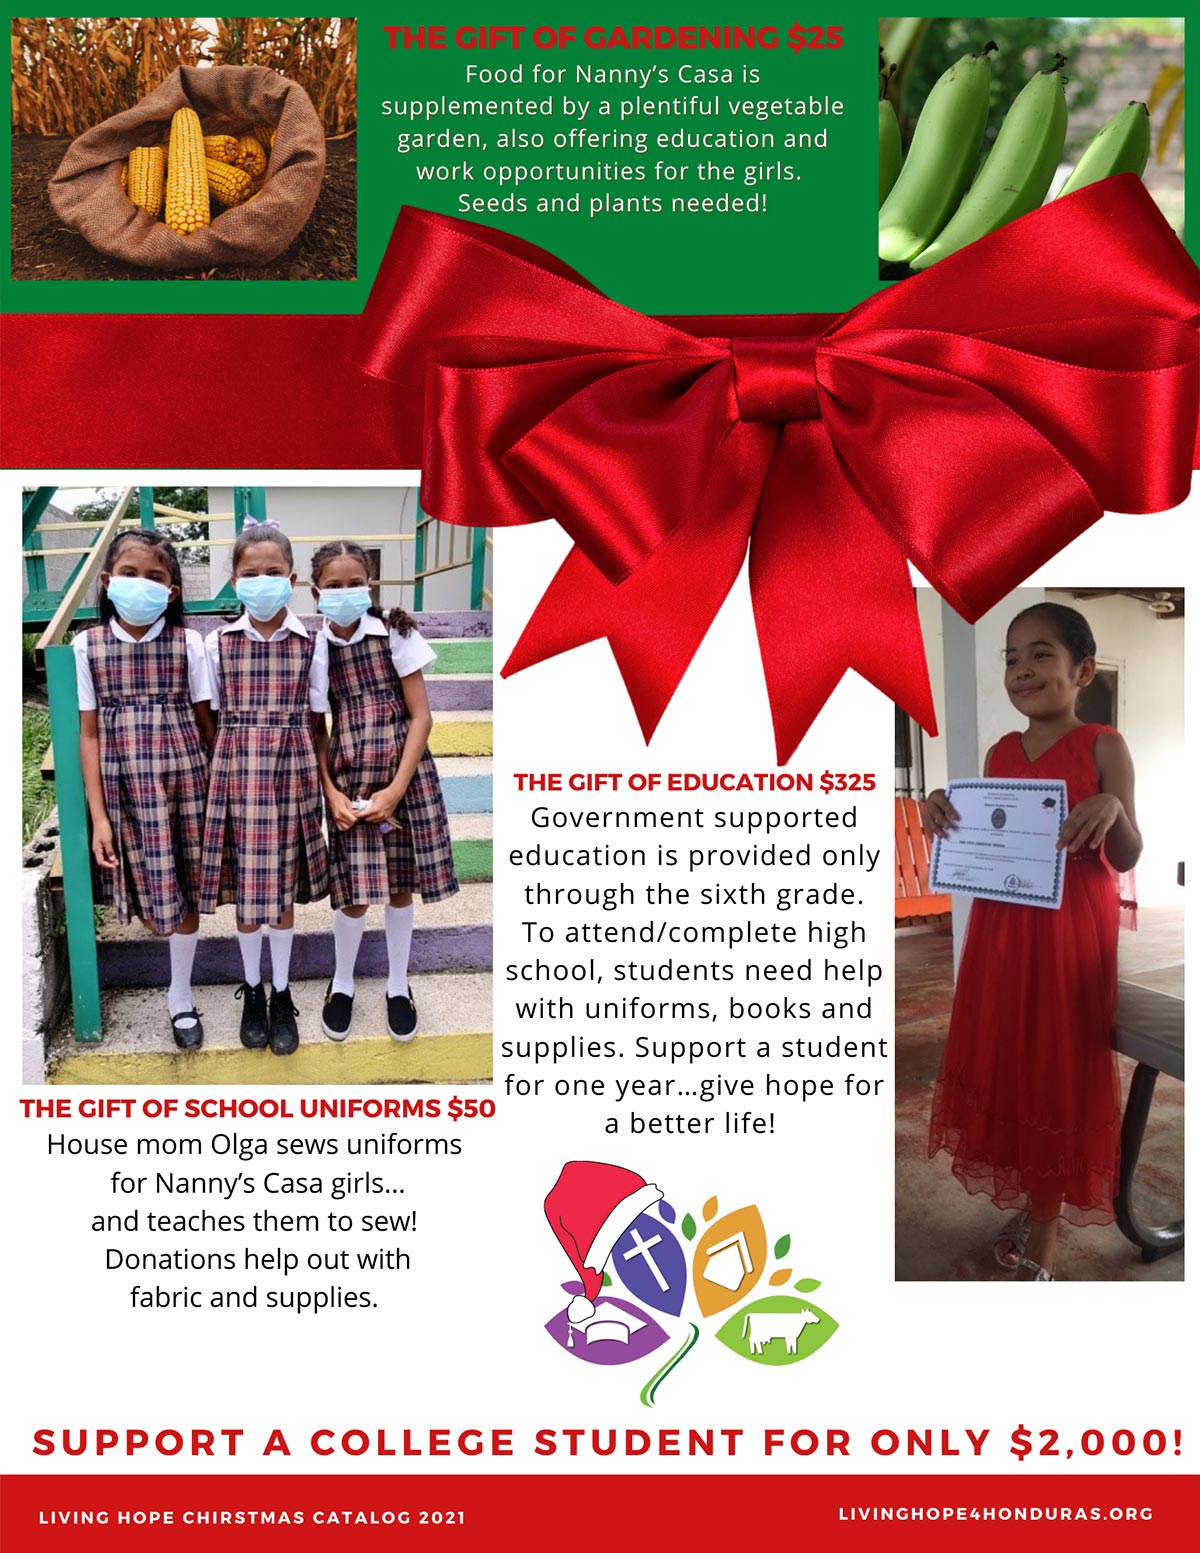 Page 2 of the Living Hope for Honduras Christmas Catalog, which outlines various levels of gifts that donors can contribute.